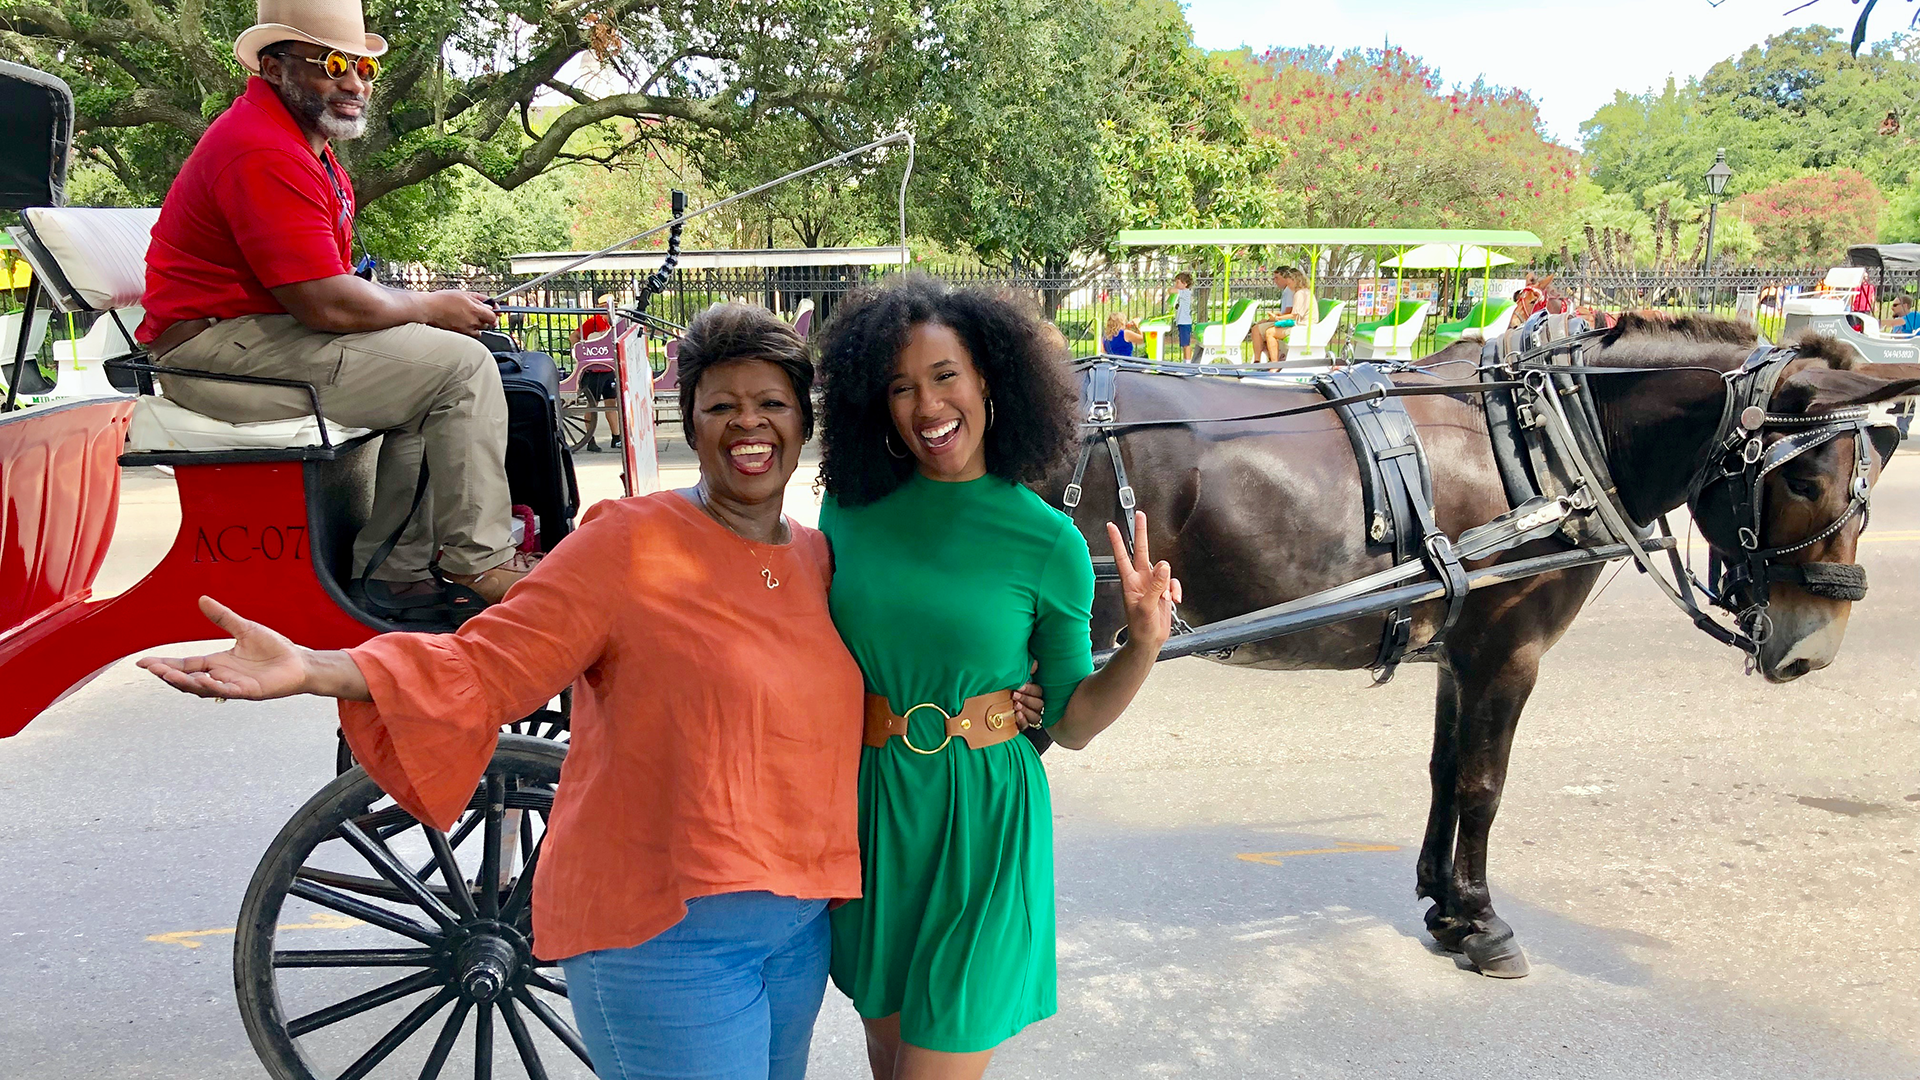 The Soul Queen of New Orleans takes a carriage ride for a New Orleans history tour. Irma Thomas says she was fired twice before starting her singing career.